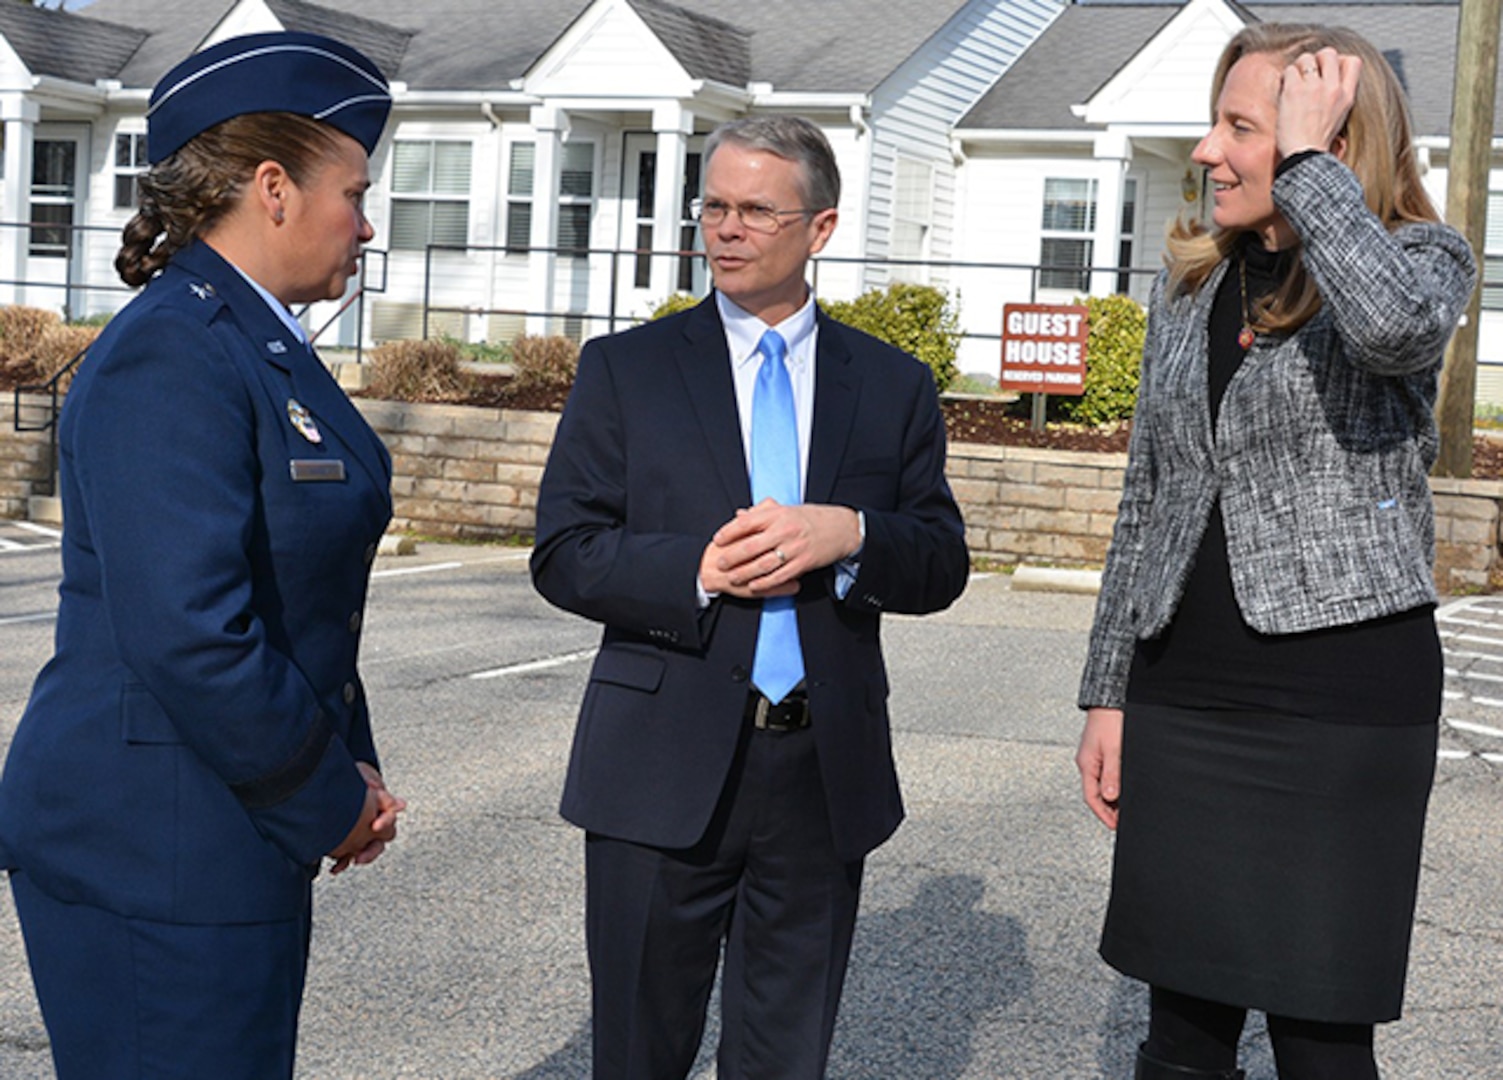 Air Force Brig. Gen. Linda Hurry speaks with David Gibson and U.S. Rep. Abigail Spanberger, D-Va.